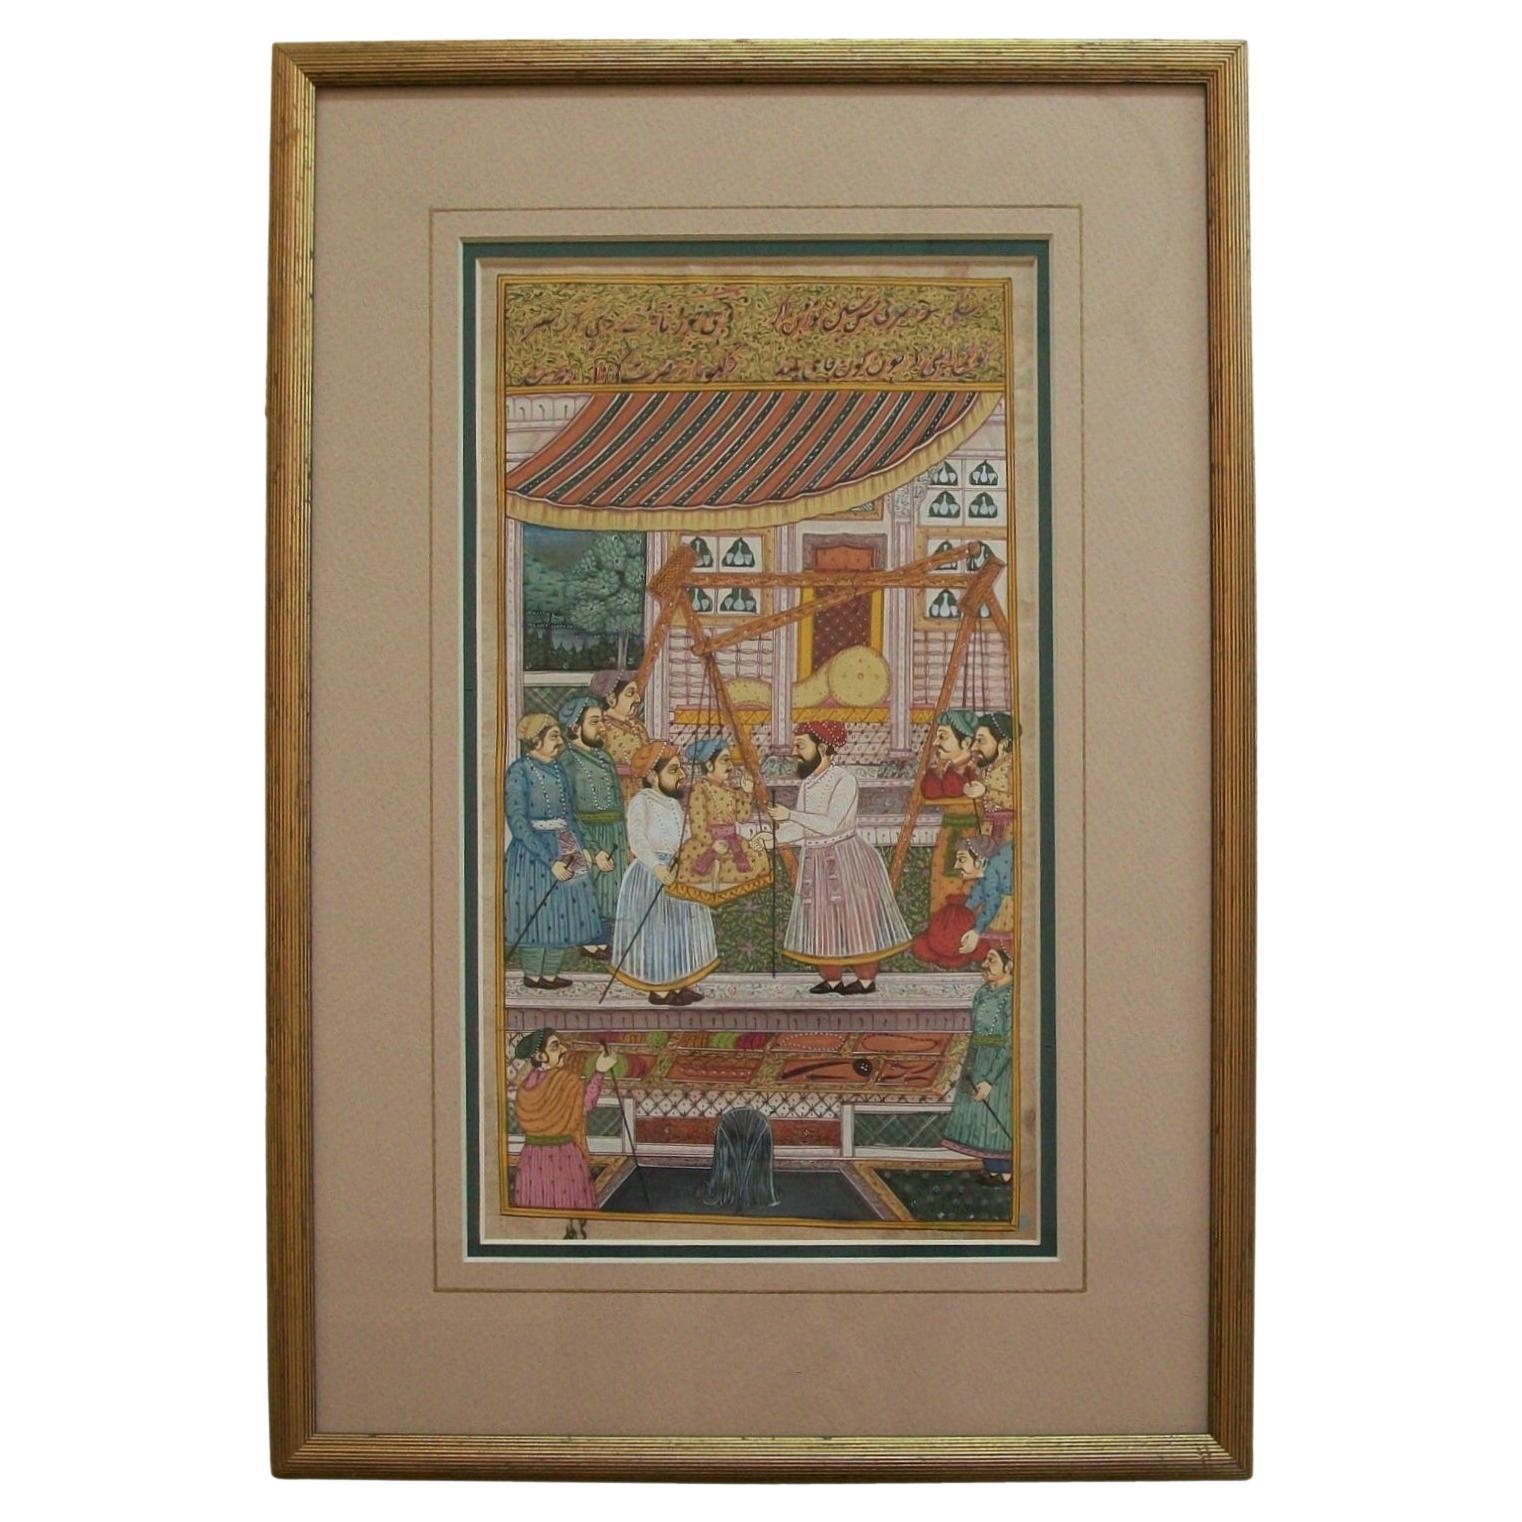 Mughal Style Miniature Court Scene Painting - Framed - India - 20th Century For Sale